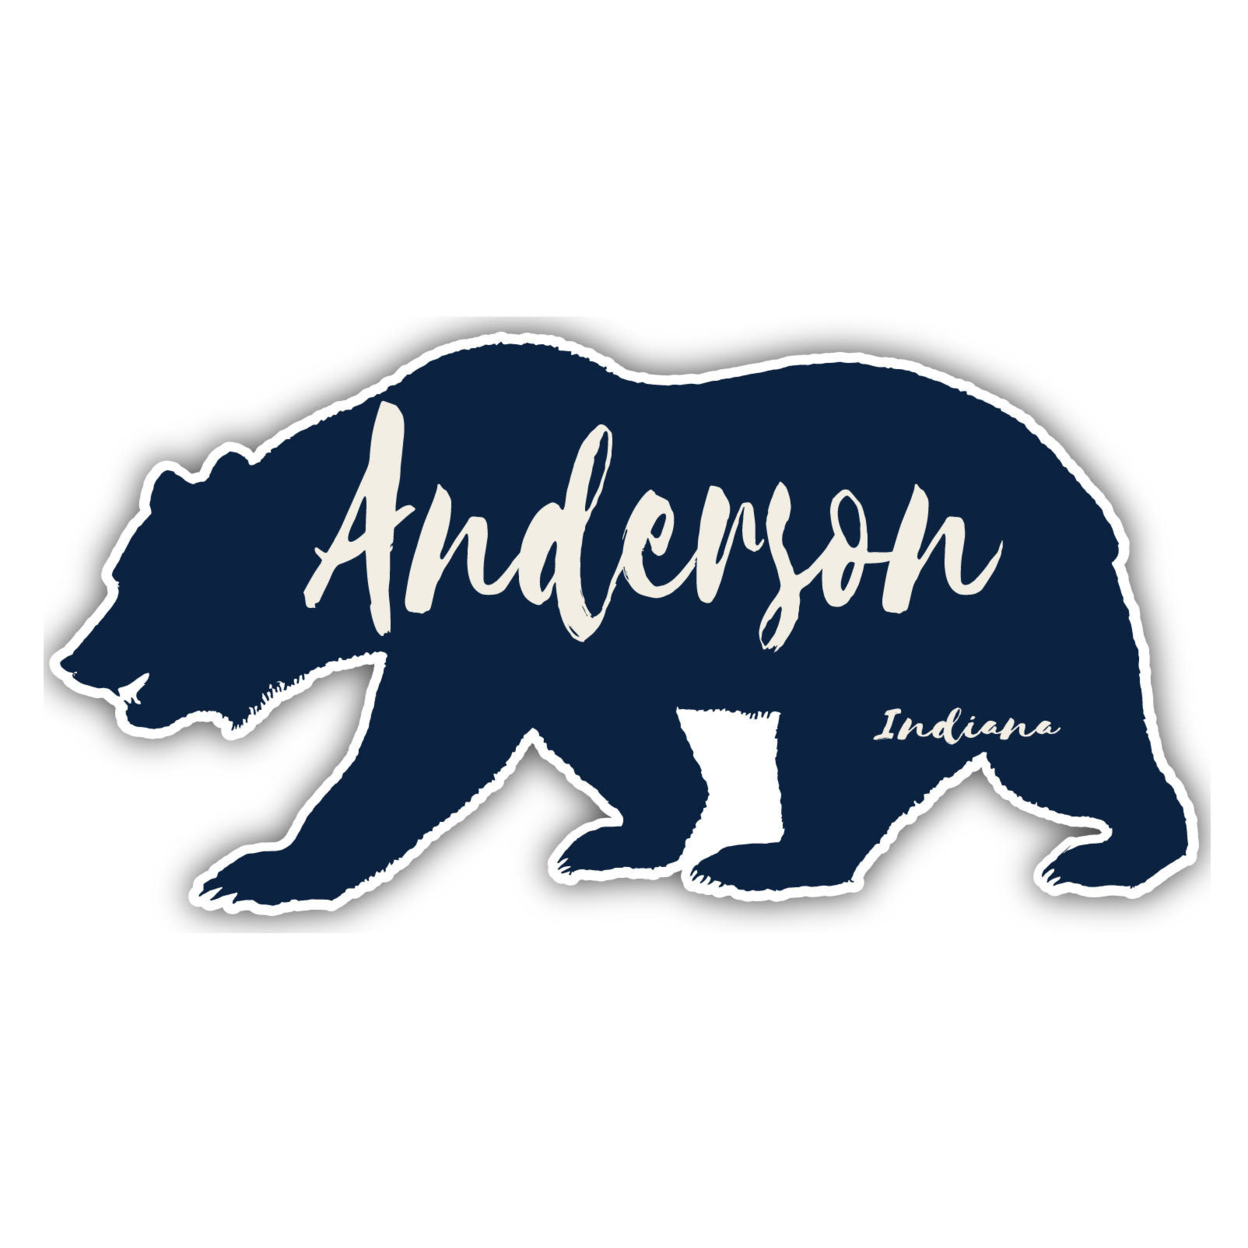 Anderson Indiana Souvenir Decorative Stickers (Choose Theme And Size) - 4-Pack, 4-Inch, Bear